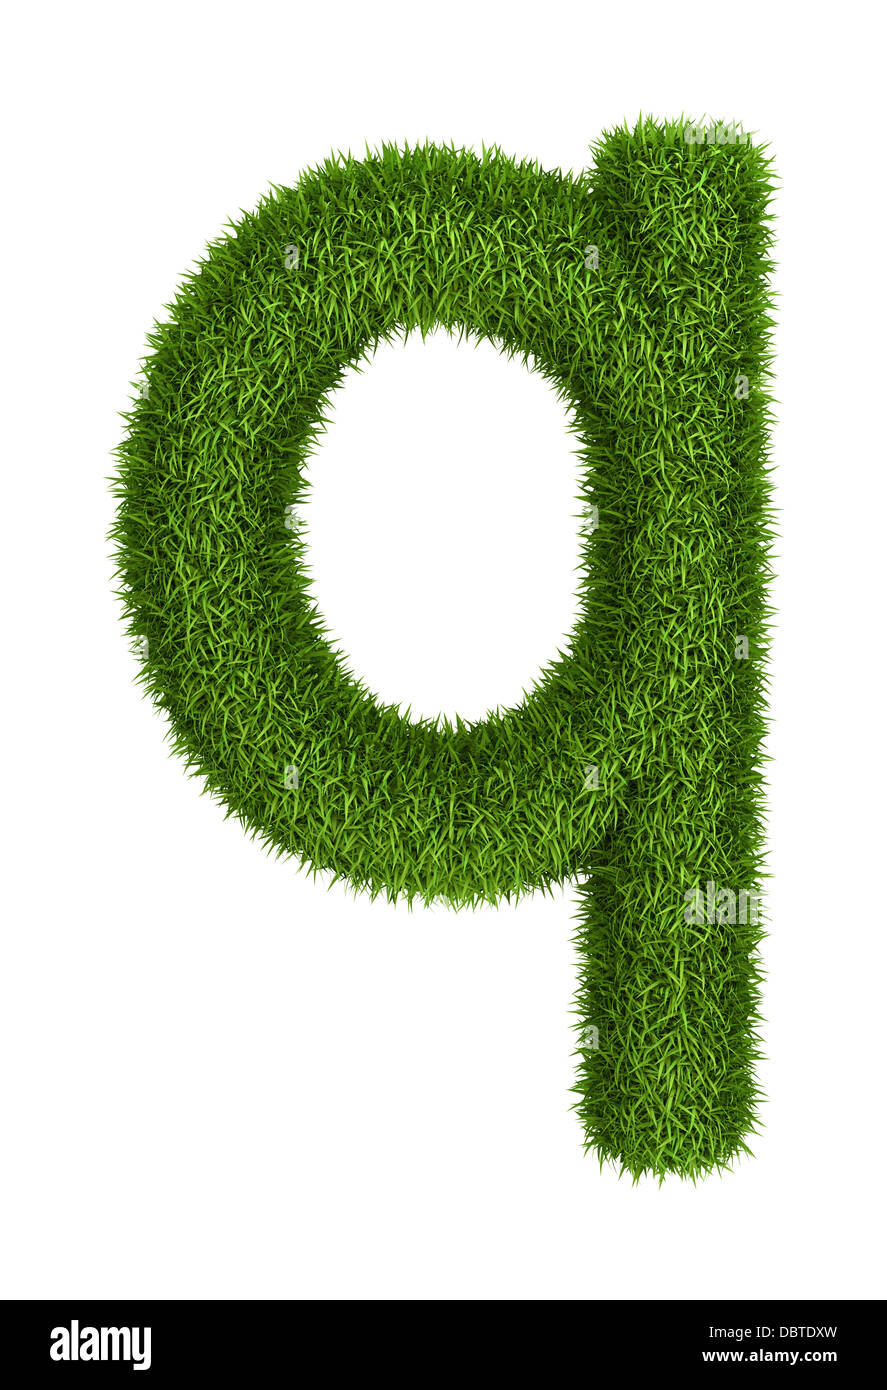 Natural grass letter q lowercase Stock Photo